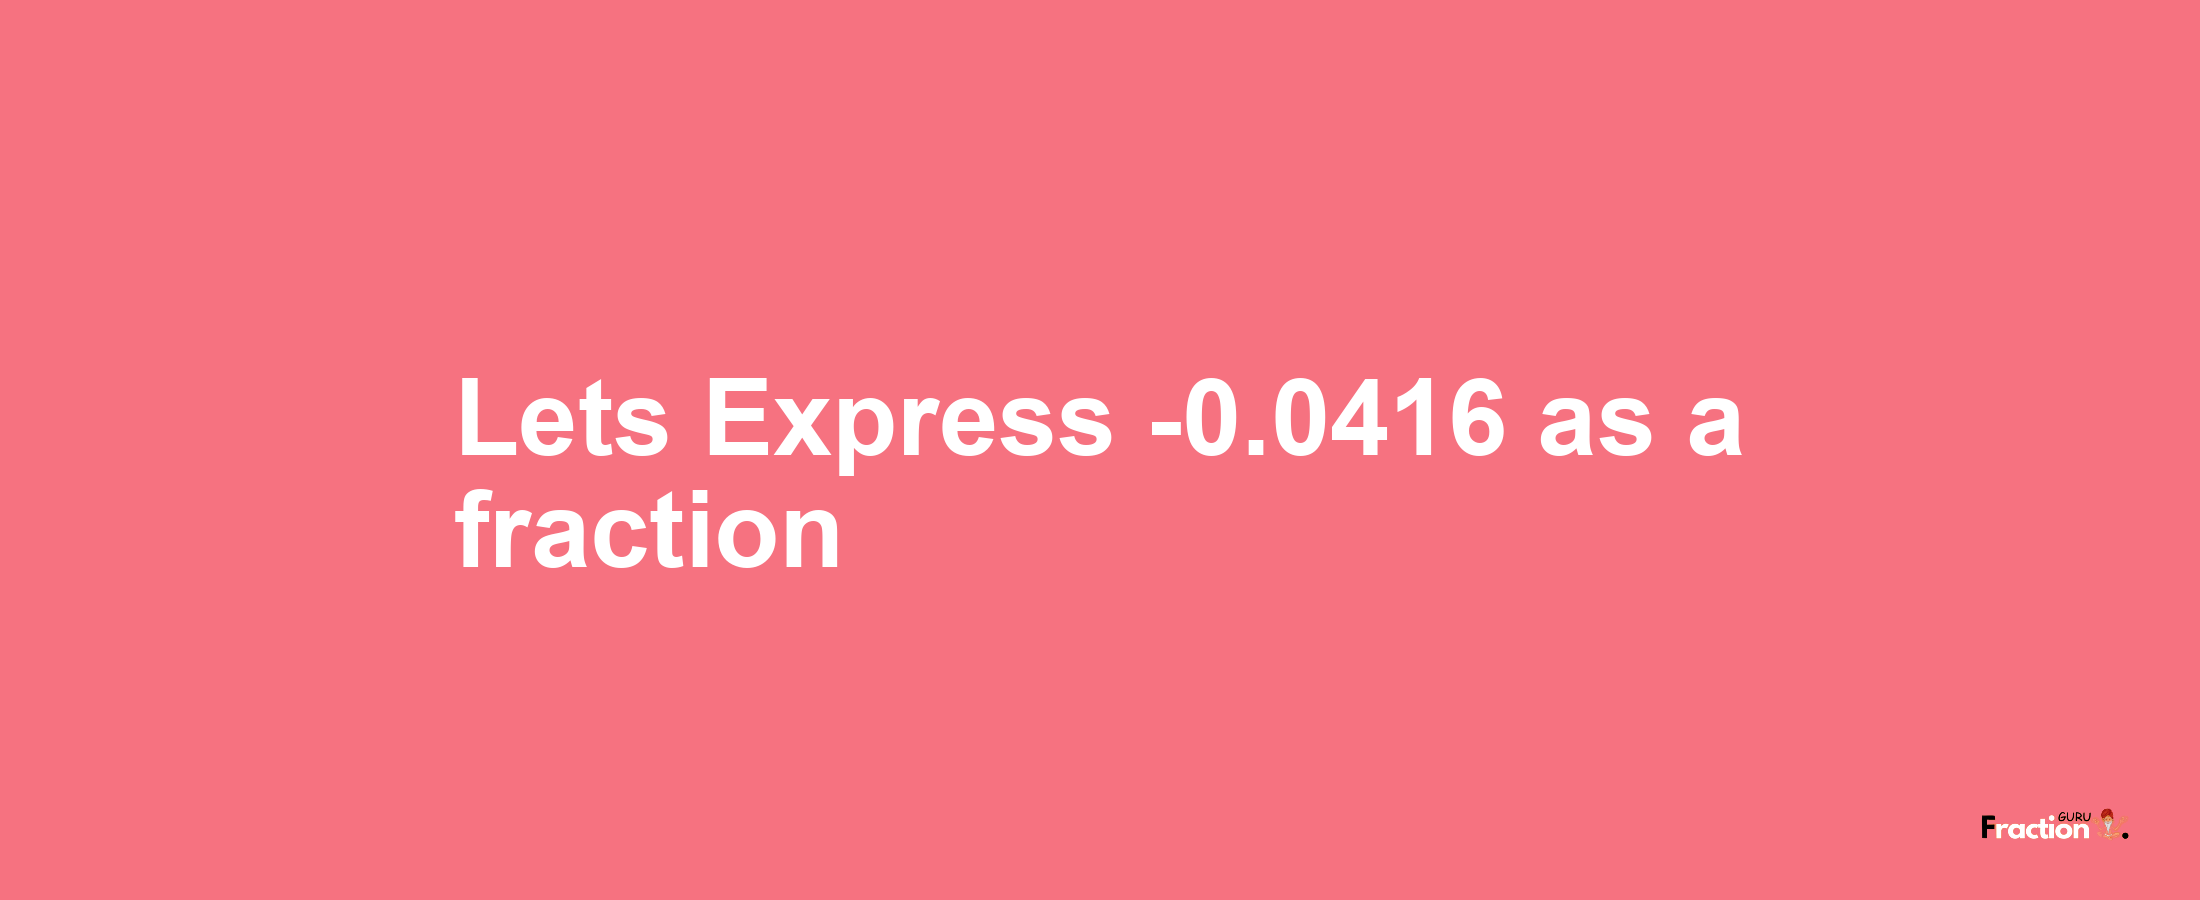 Lets Express -0.0416 as afraction